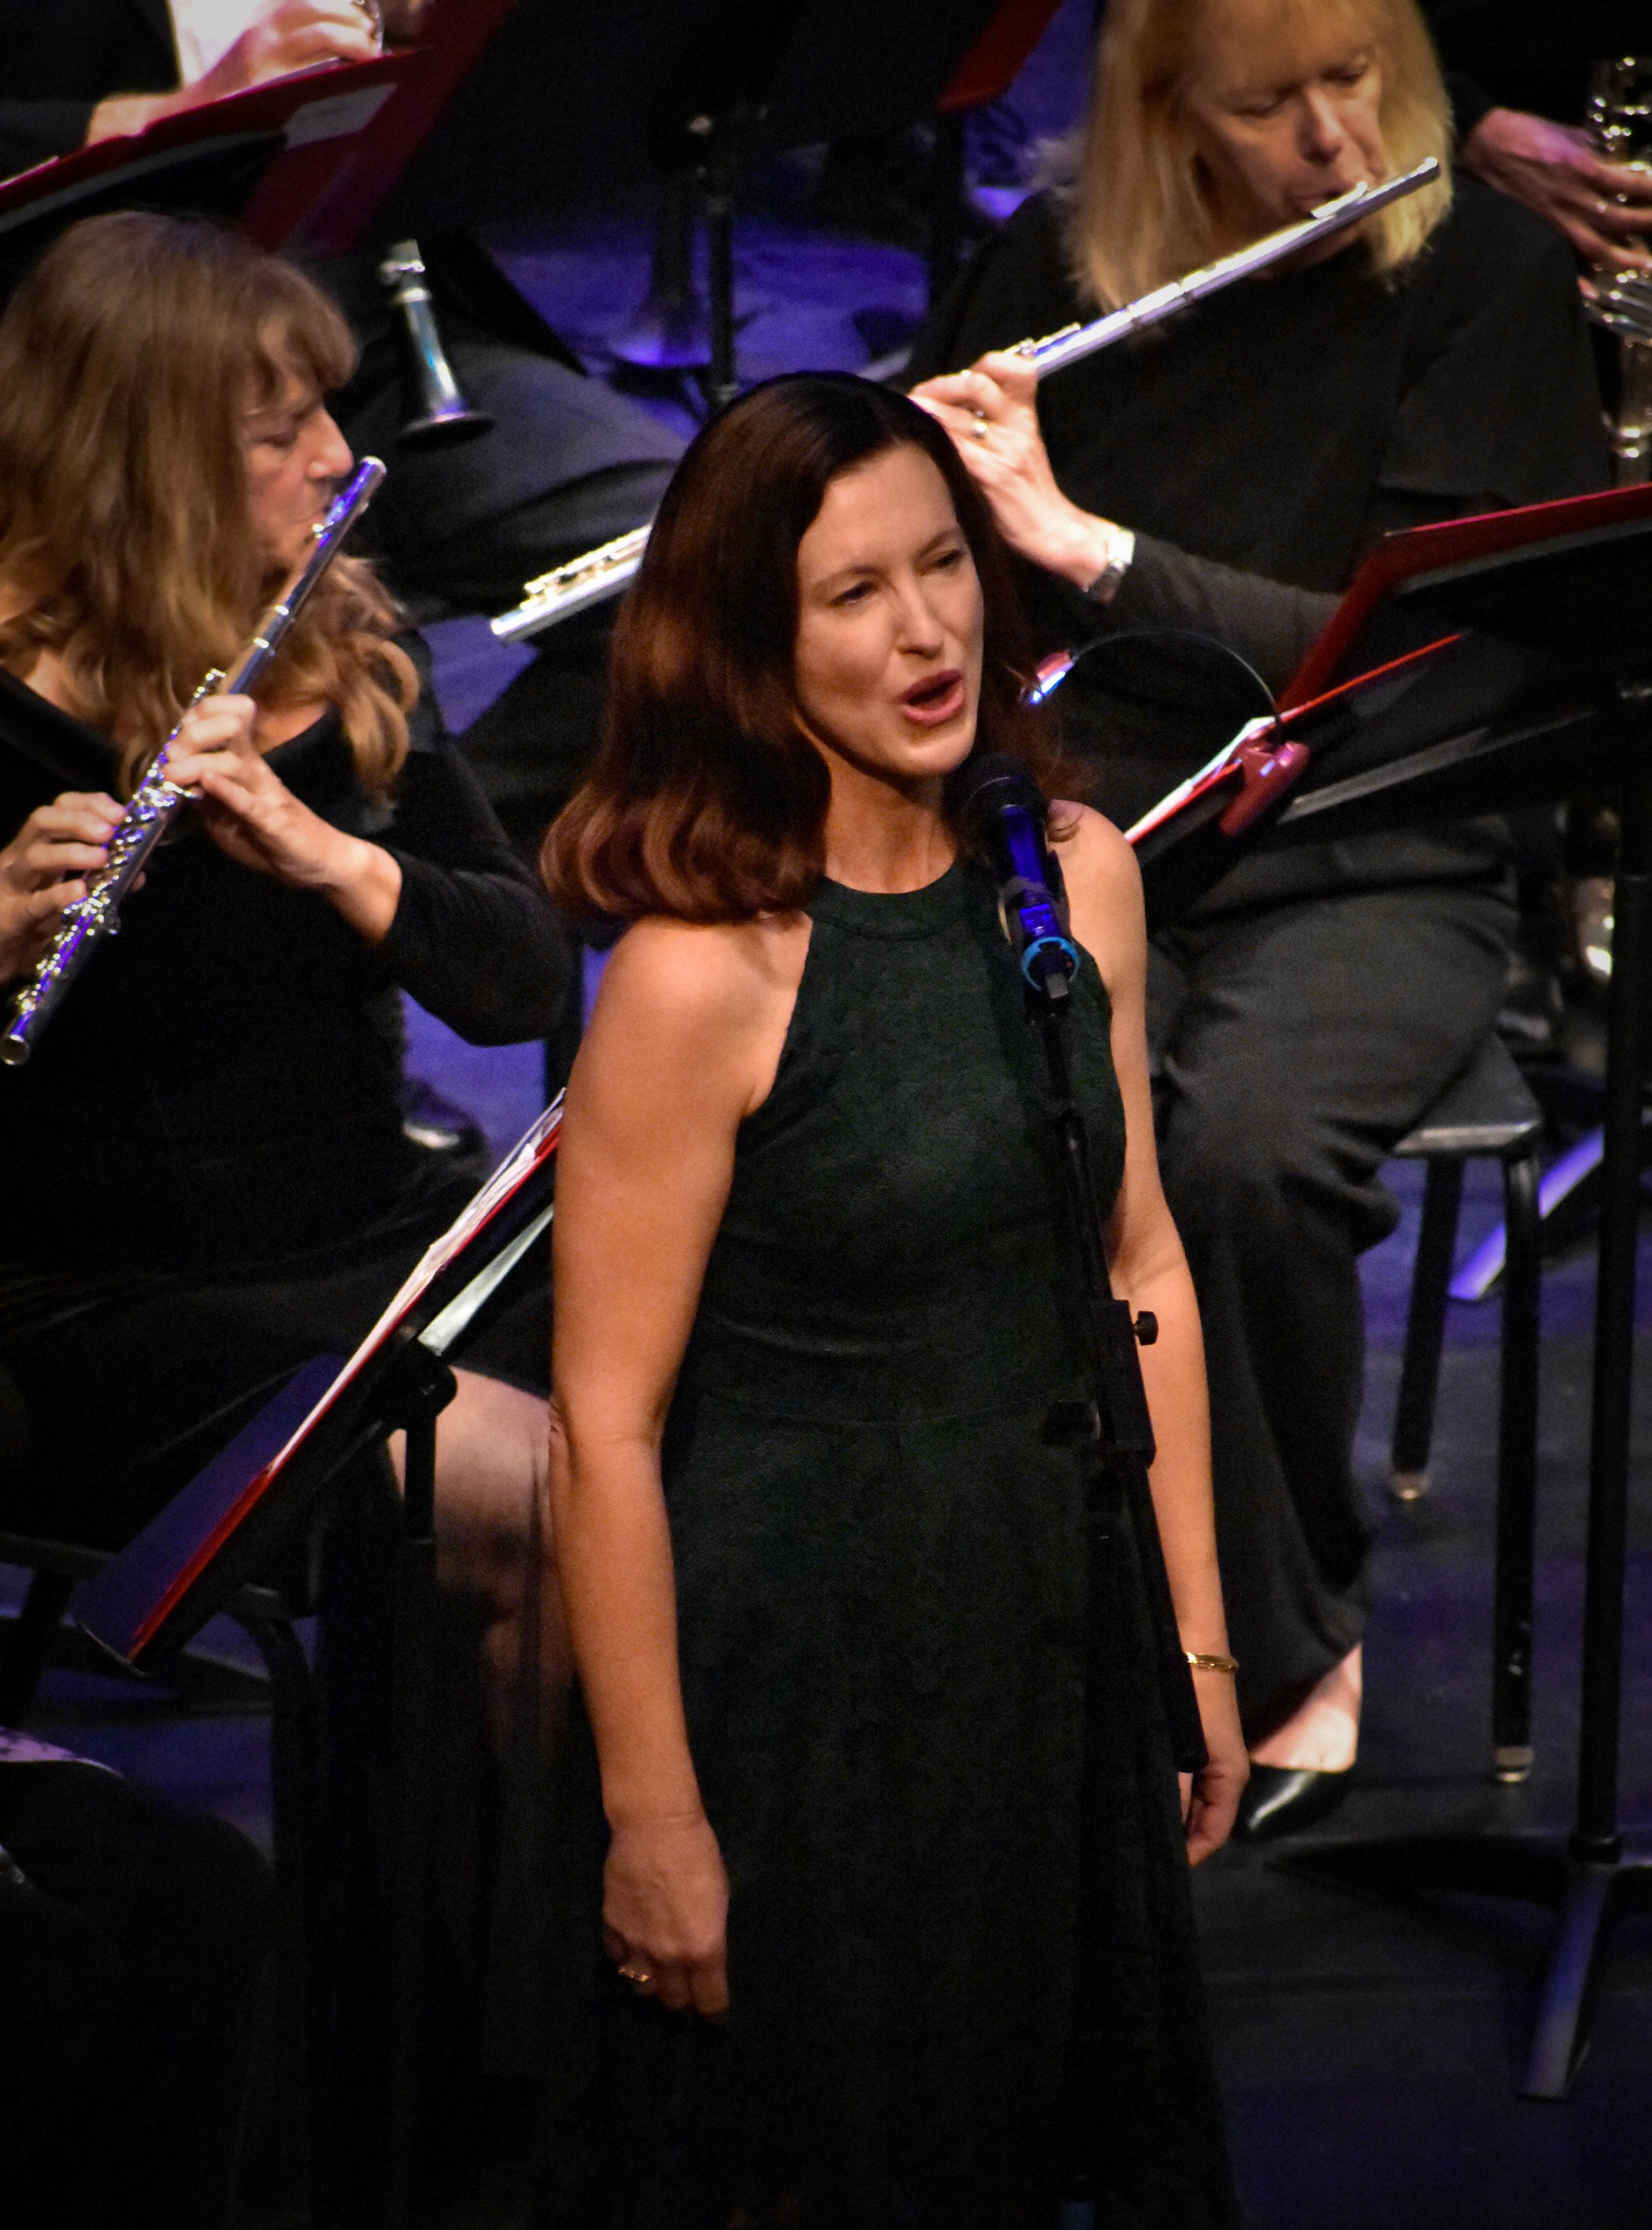 12-19-2021 LCB Holiday Concert by Peyton Webster19-11.jpg